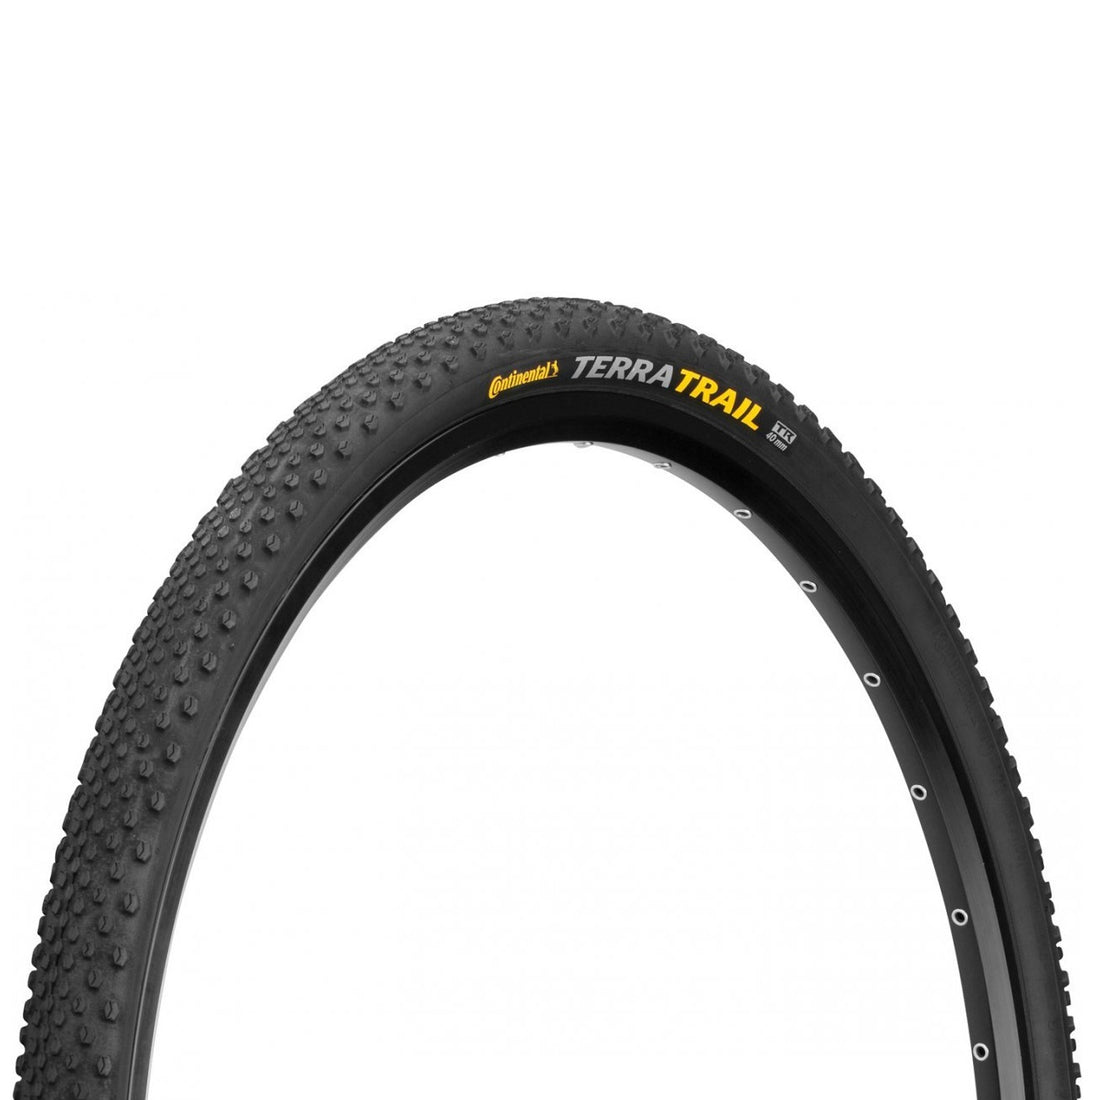 Continental Terra Trail Tubeless Tyre - CCACHE